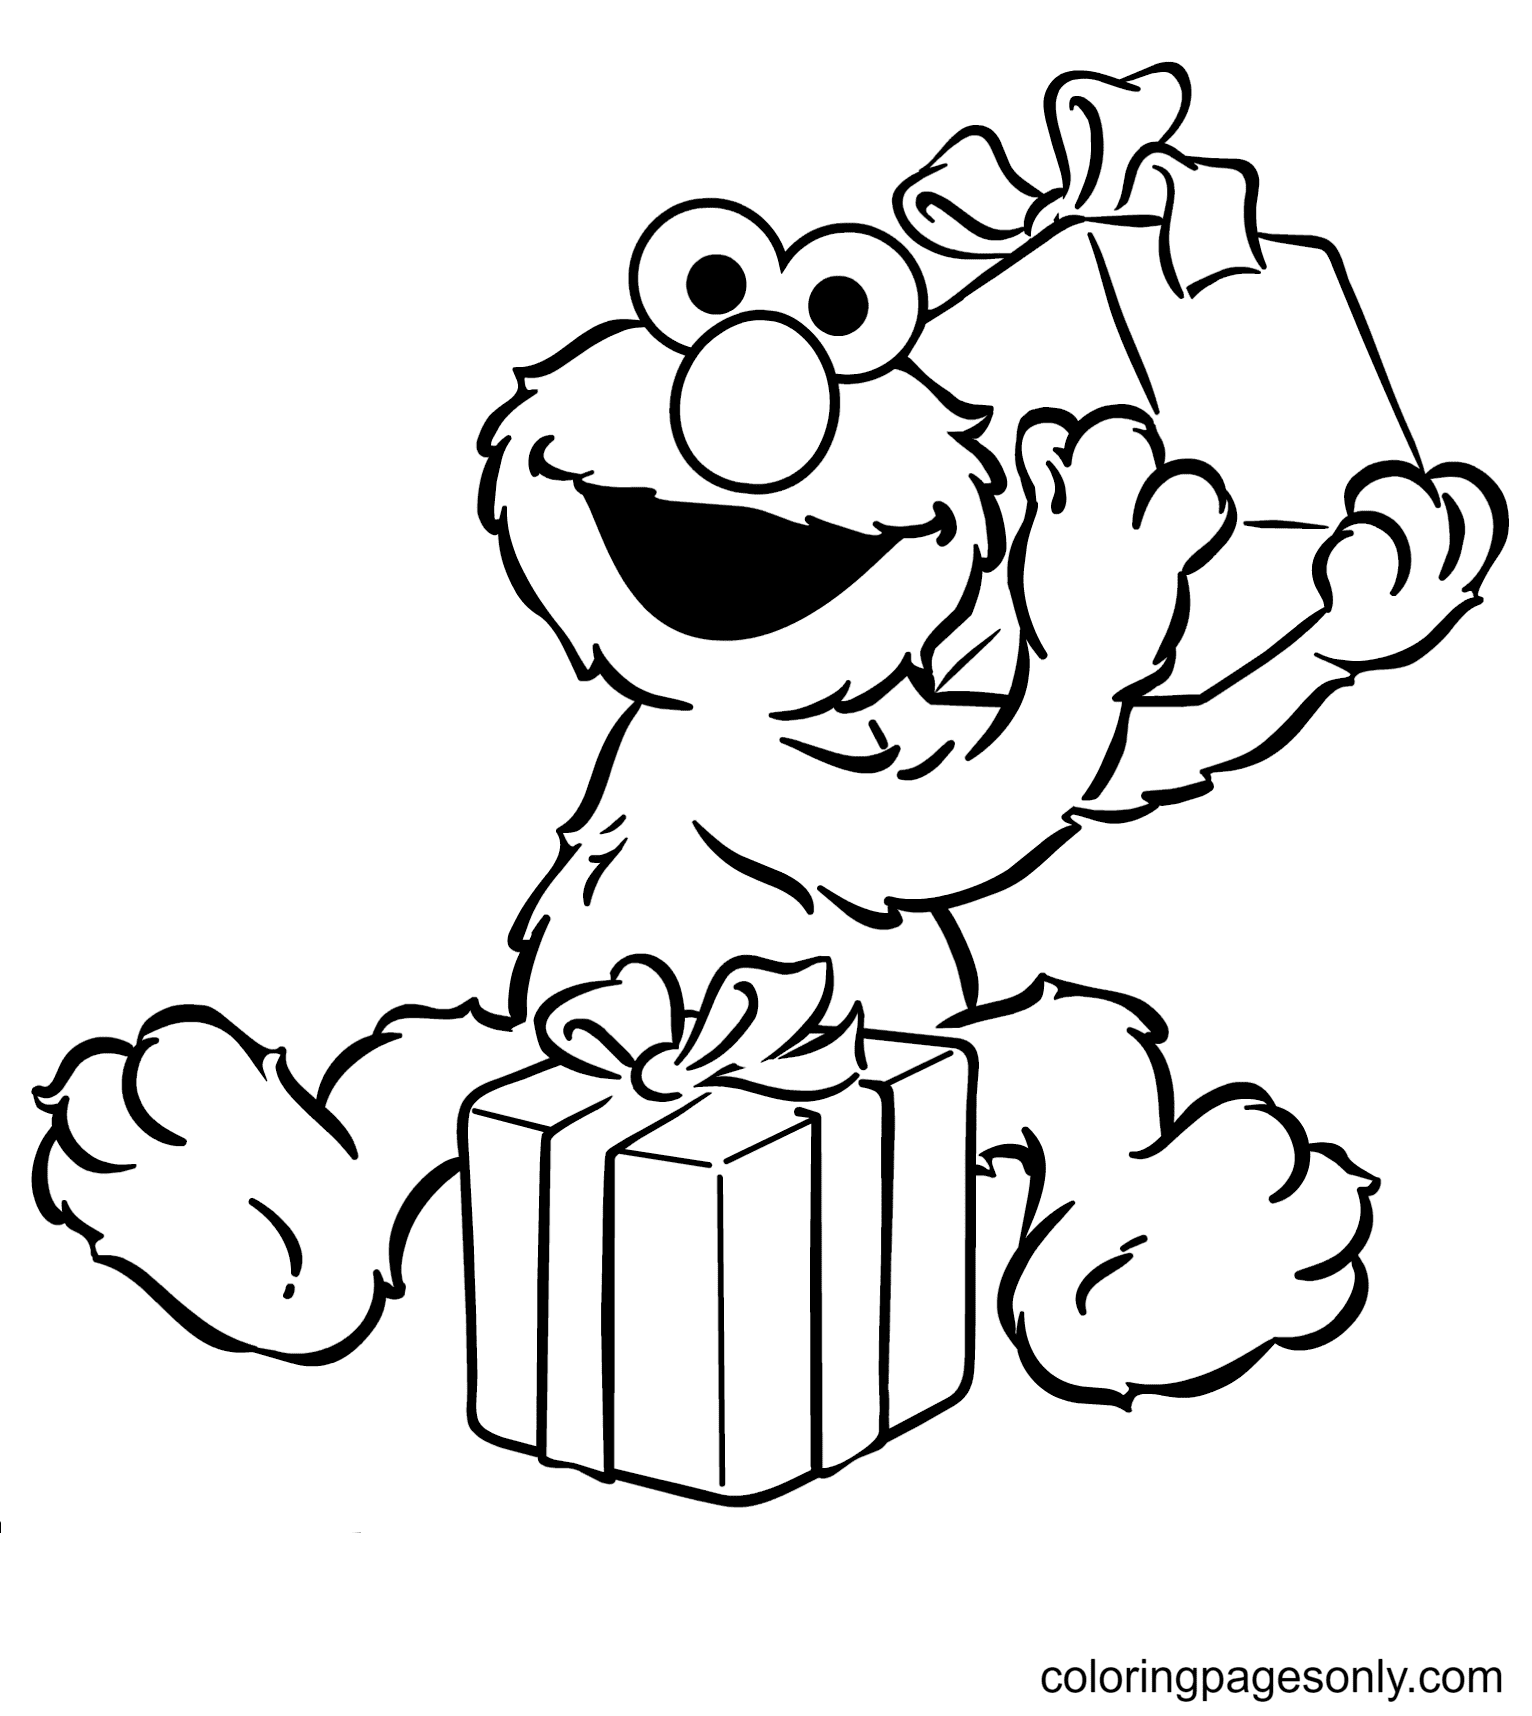 Elmo Opening Birthday Presents Coloring Page